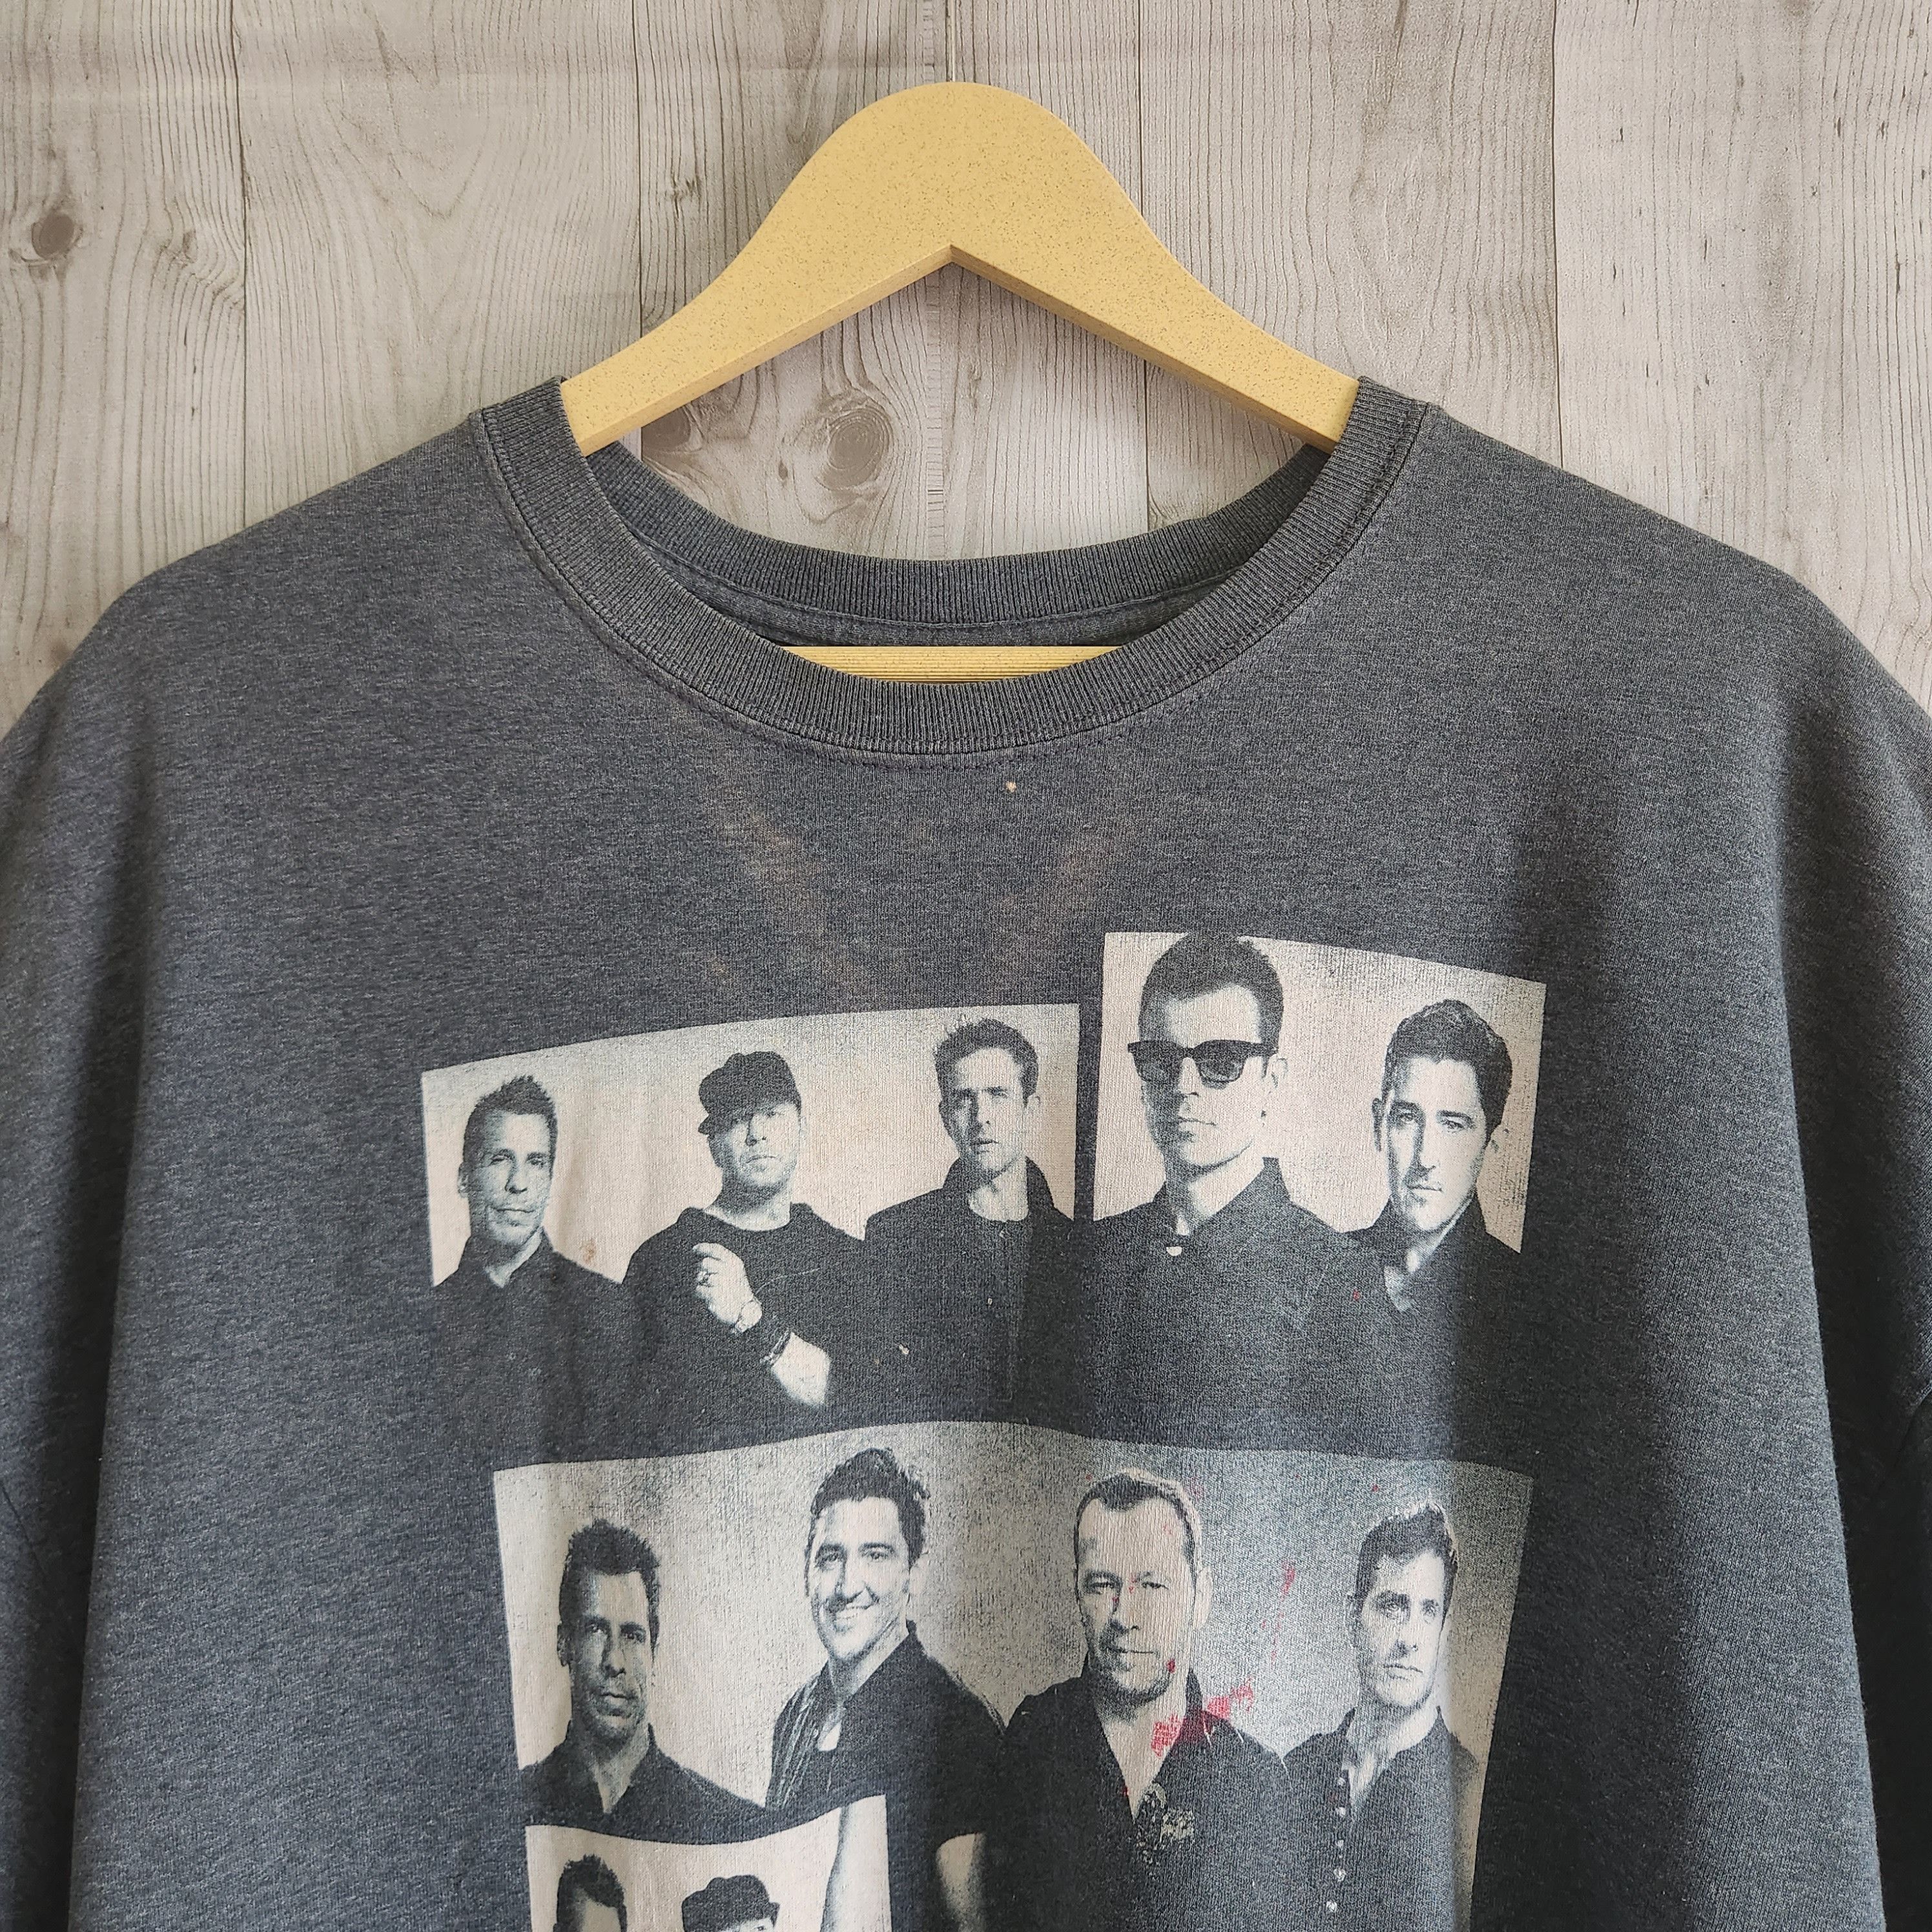 Band Tees - New Kids On The Block TShirt Copyright 2015 - 17